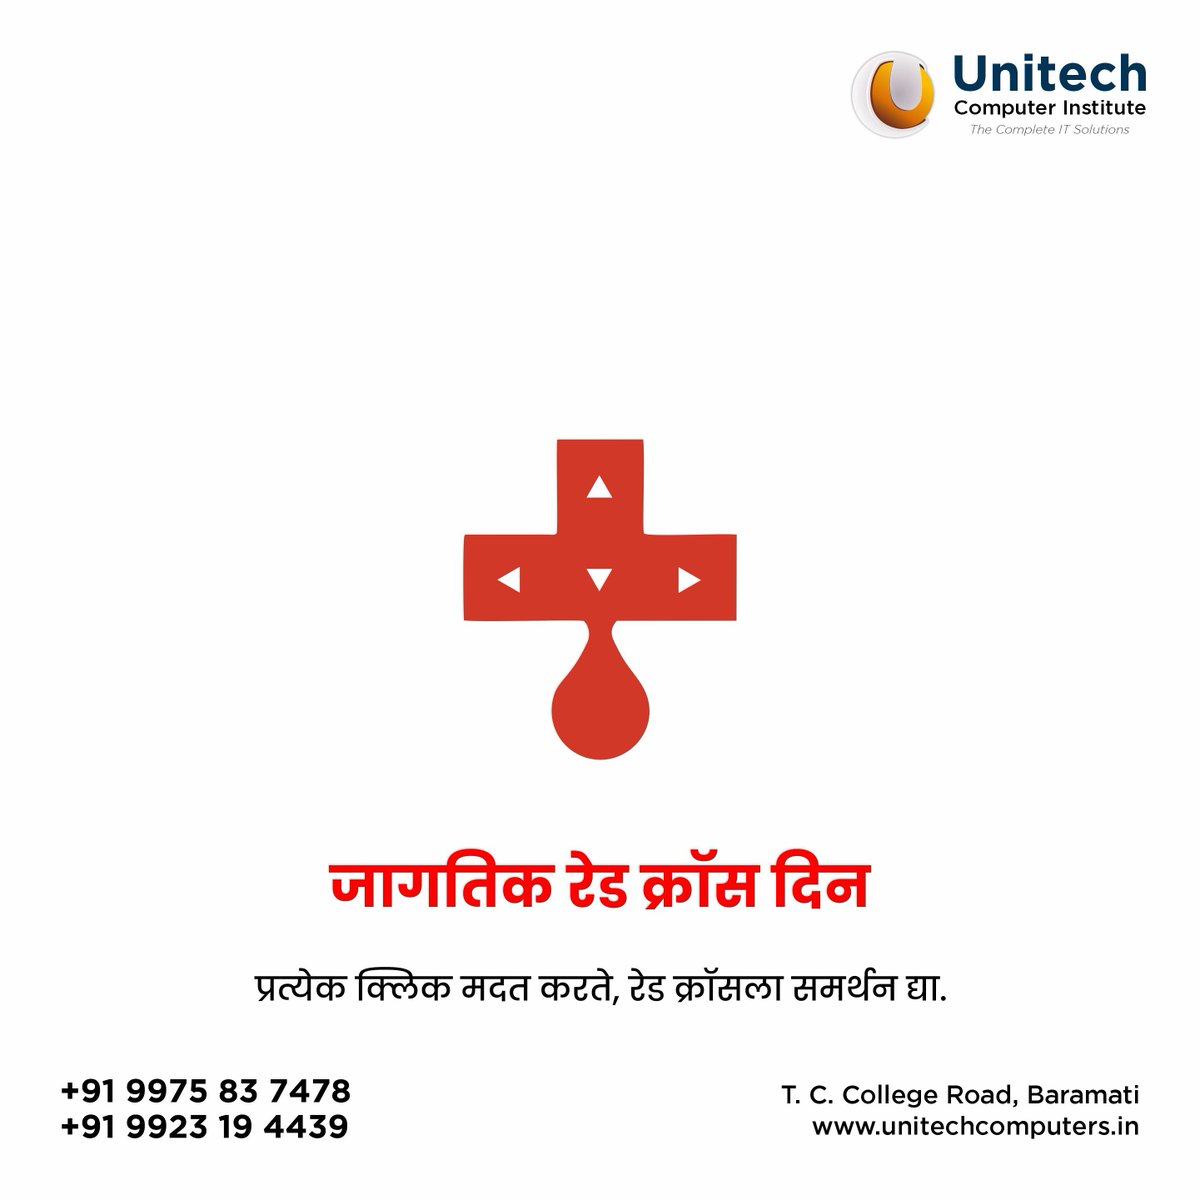 जागतिक रेड क्रॉस दिन 
+91 9975 83 7478  I  +91 9923 19 4439

#institute #education #training #students  #college #fallout #best #studyabroad #career #study #learning #computer #unitech
#redcross #roteskreuz #medialunaroja #covid #redcross #redcrossday #worldredcrossday